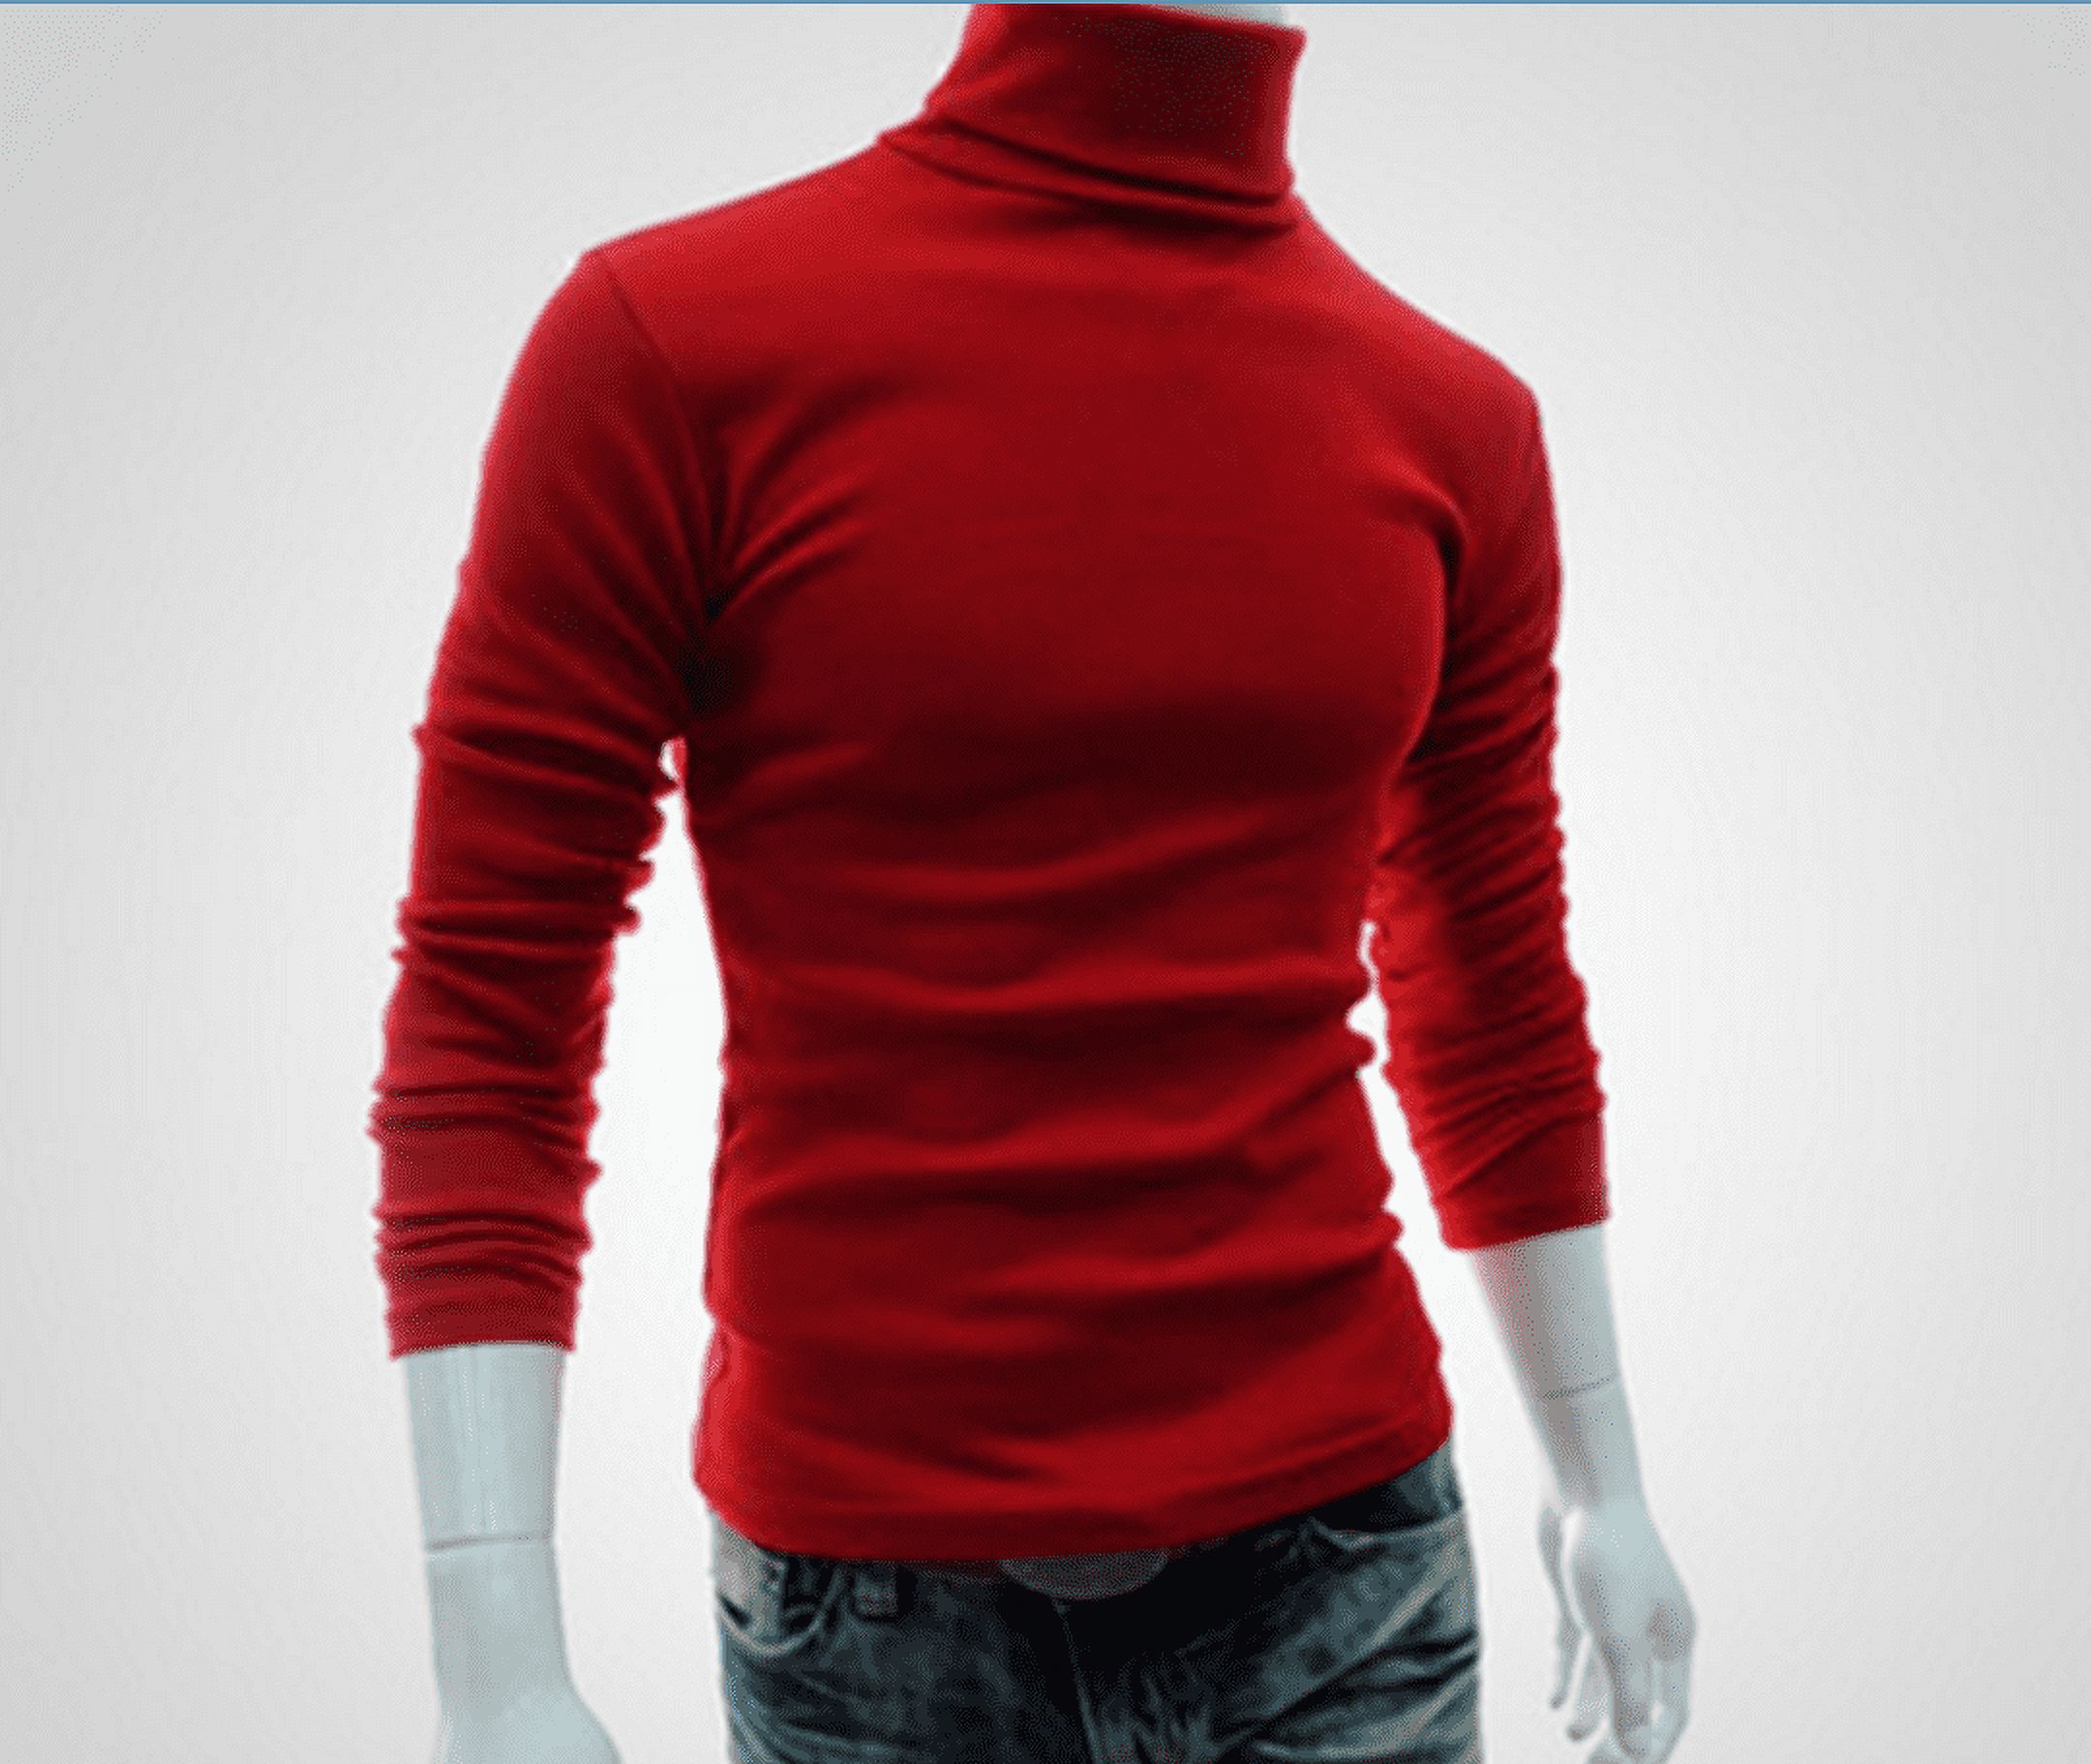 Seyurigaoka Fashion Mens Polo Roll Turtle Neck Pullover Knitted Jumper Tops Sweater Shirt - image 1 of 6